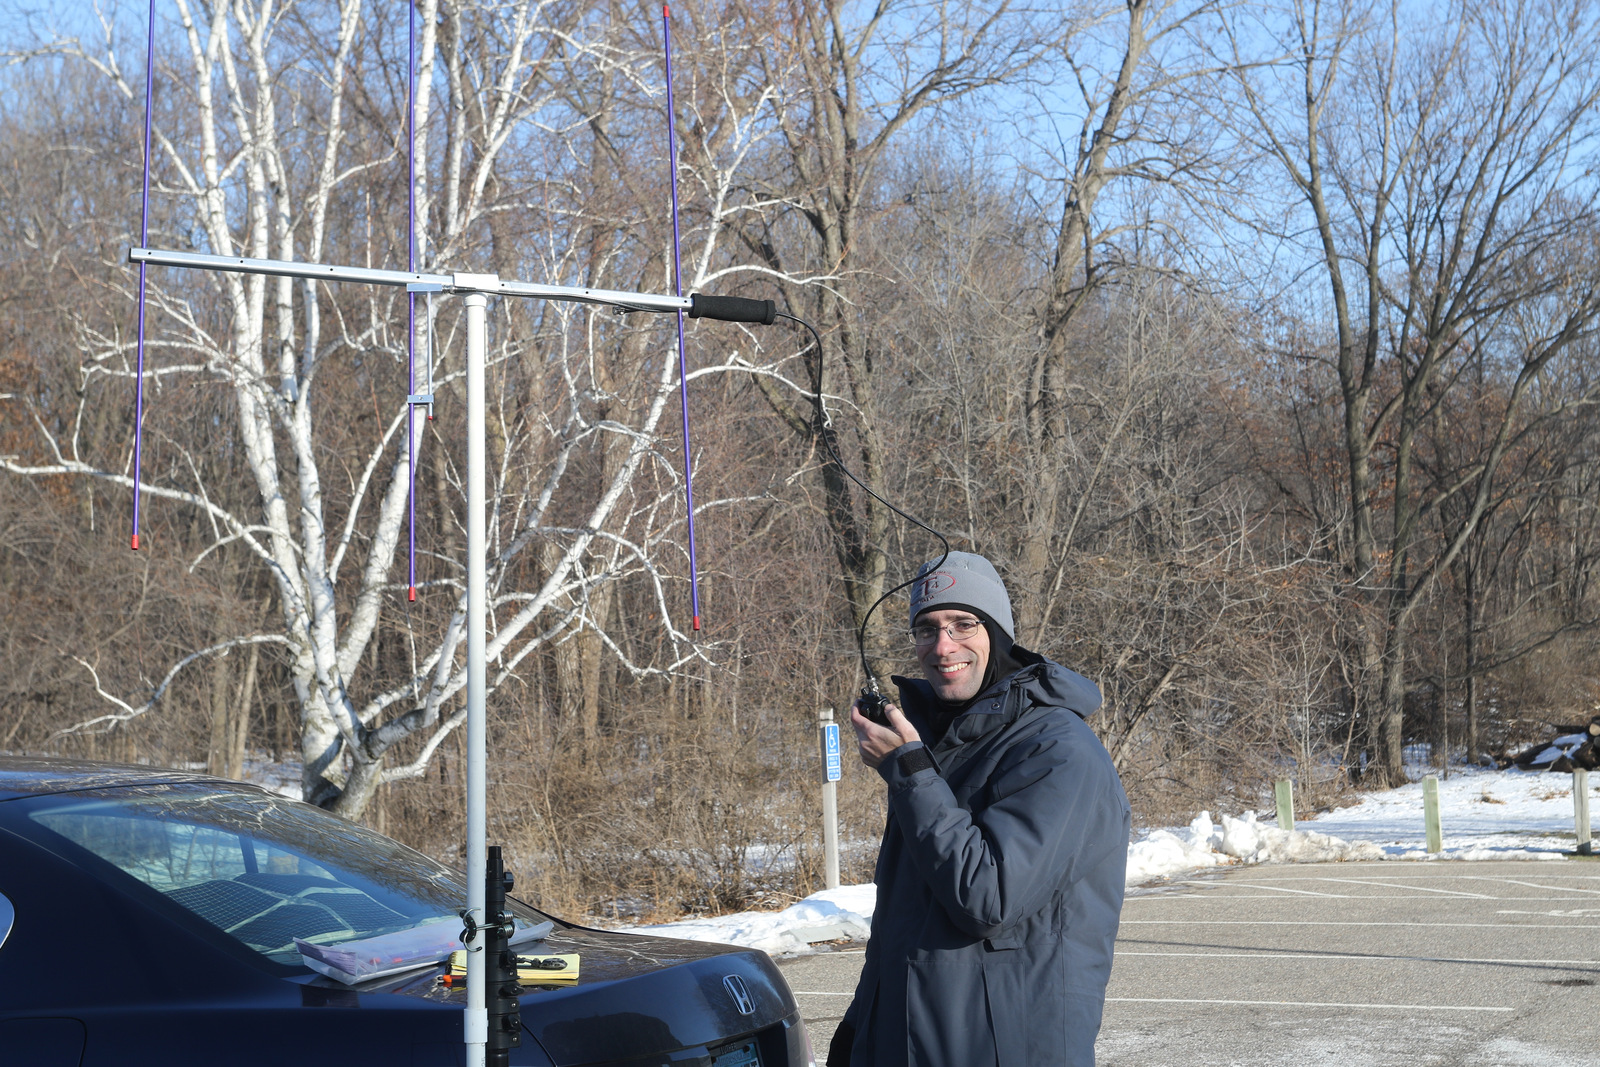 Bill, AE0EE, operates 2 m FM on a wintry day.